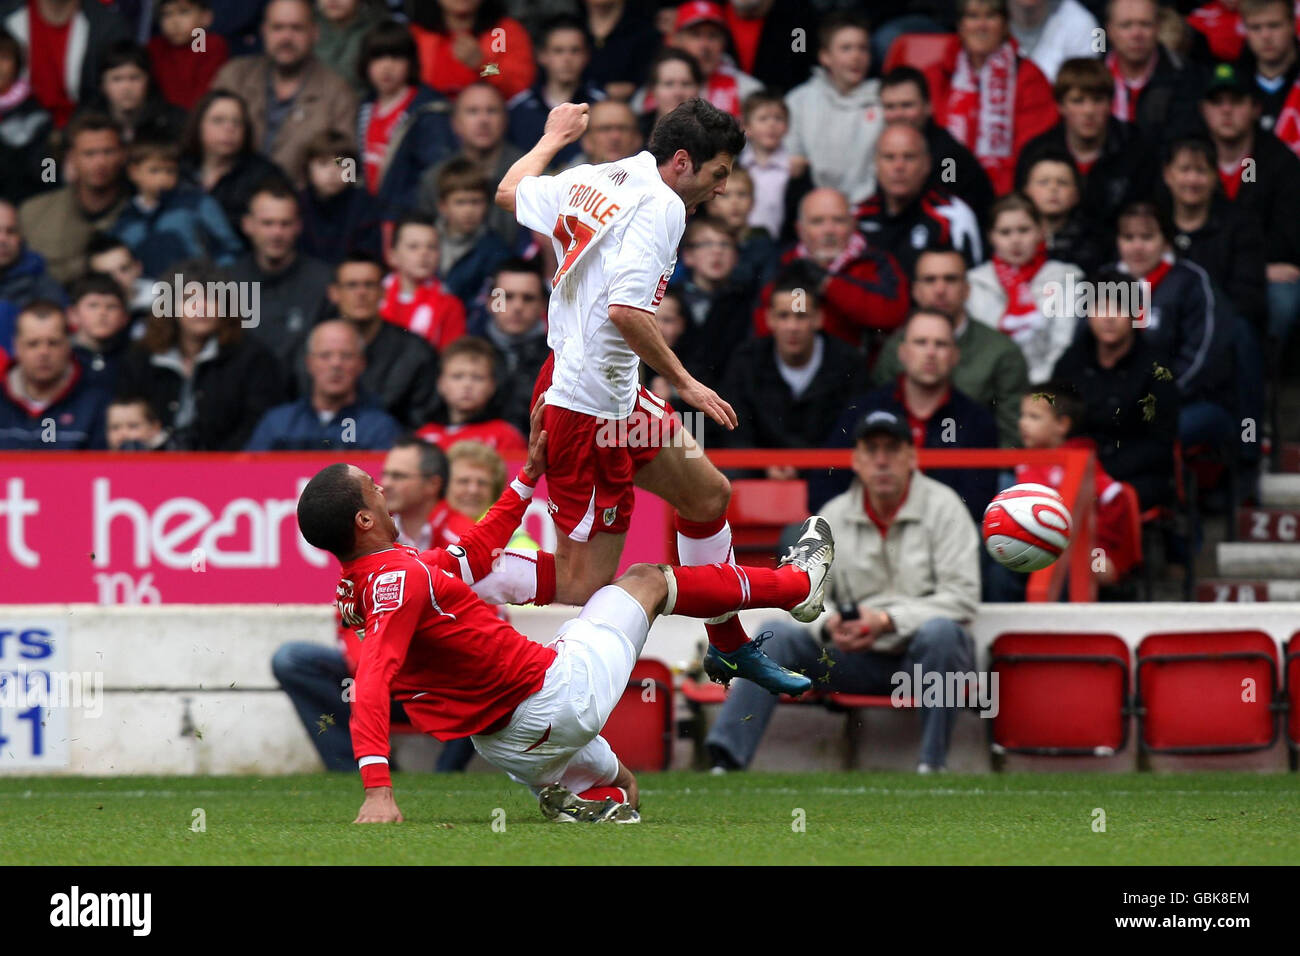 Nottingham Forest's James Perch (left) and Bristol City's Ivan Sproule (right) during the Coca-Cola Football League Championship match at the City Ground, Nottingham. Stock Photo